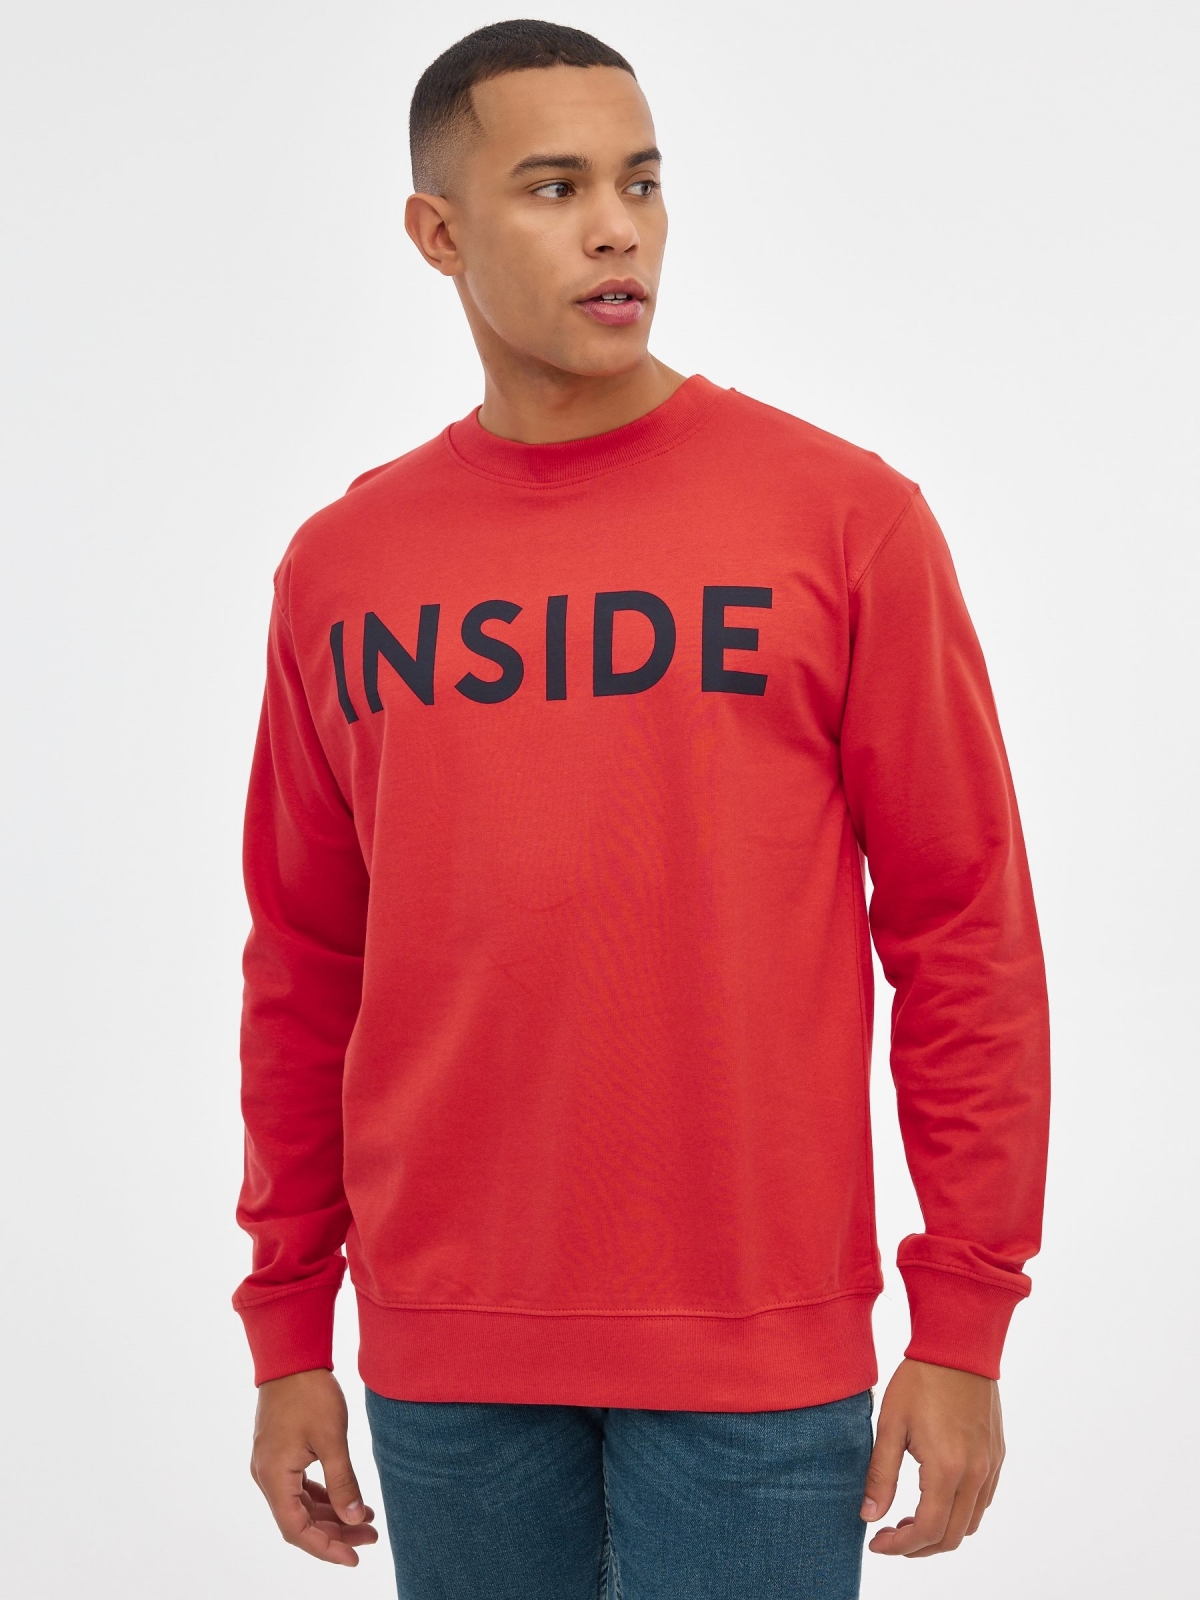 INSIDE hoodless sweatshirt red middle front view